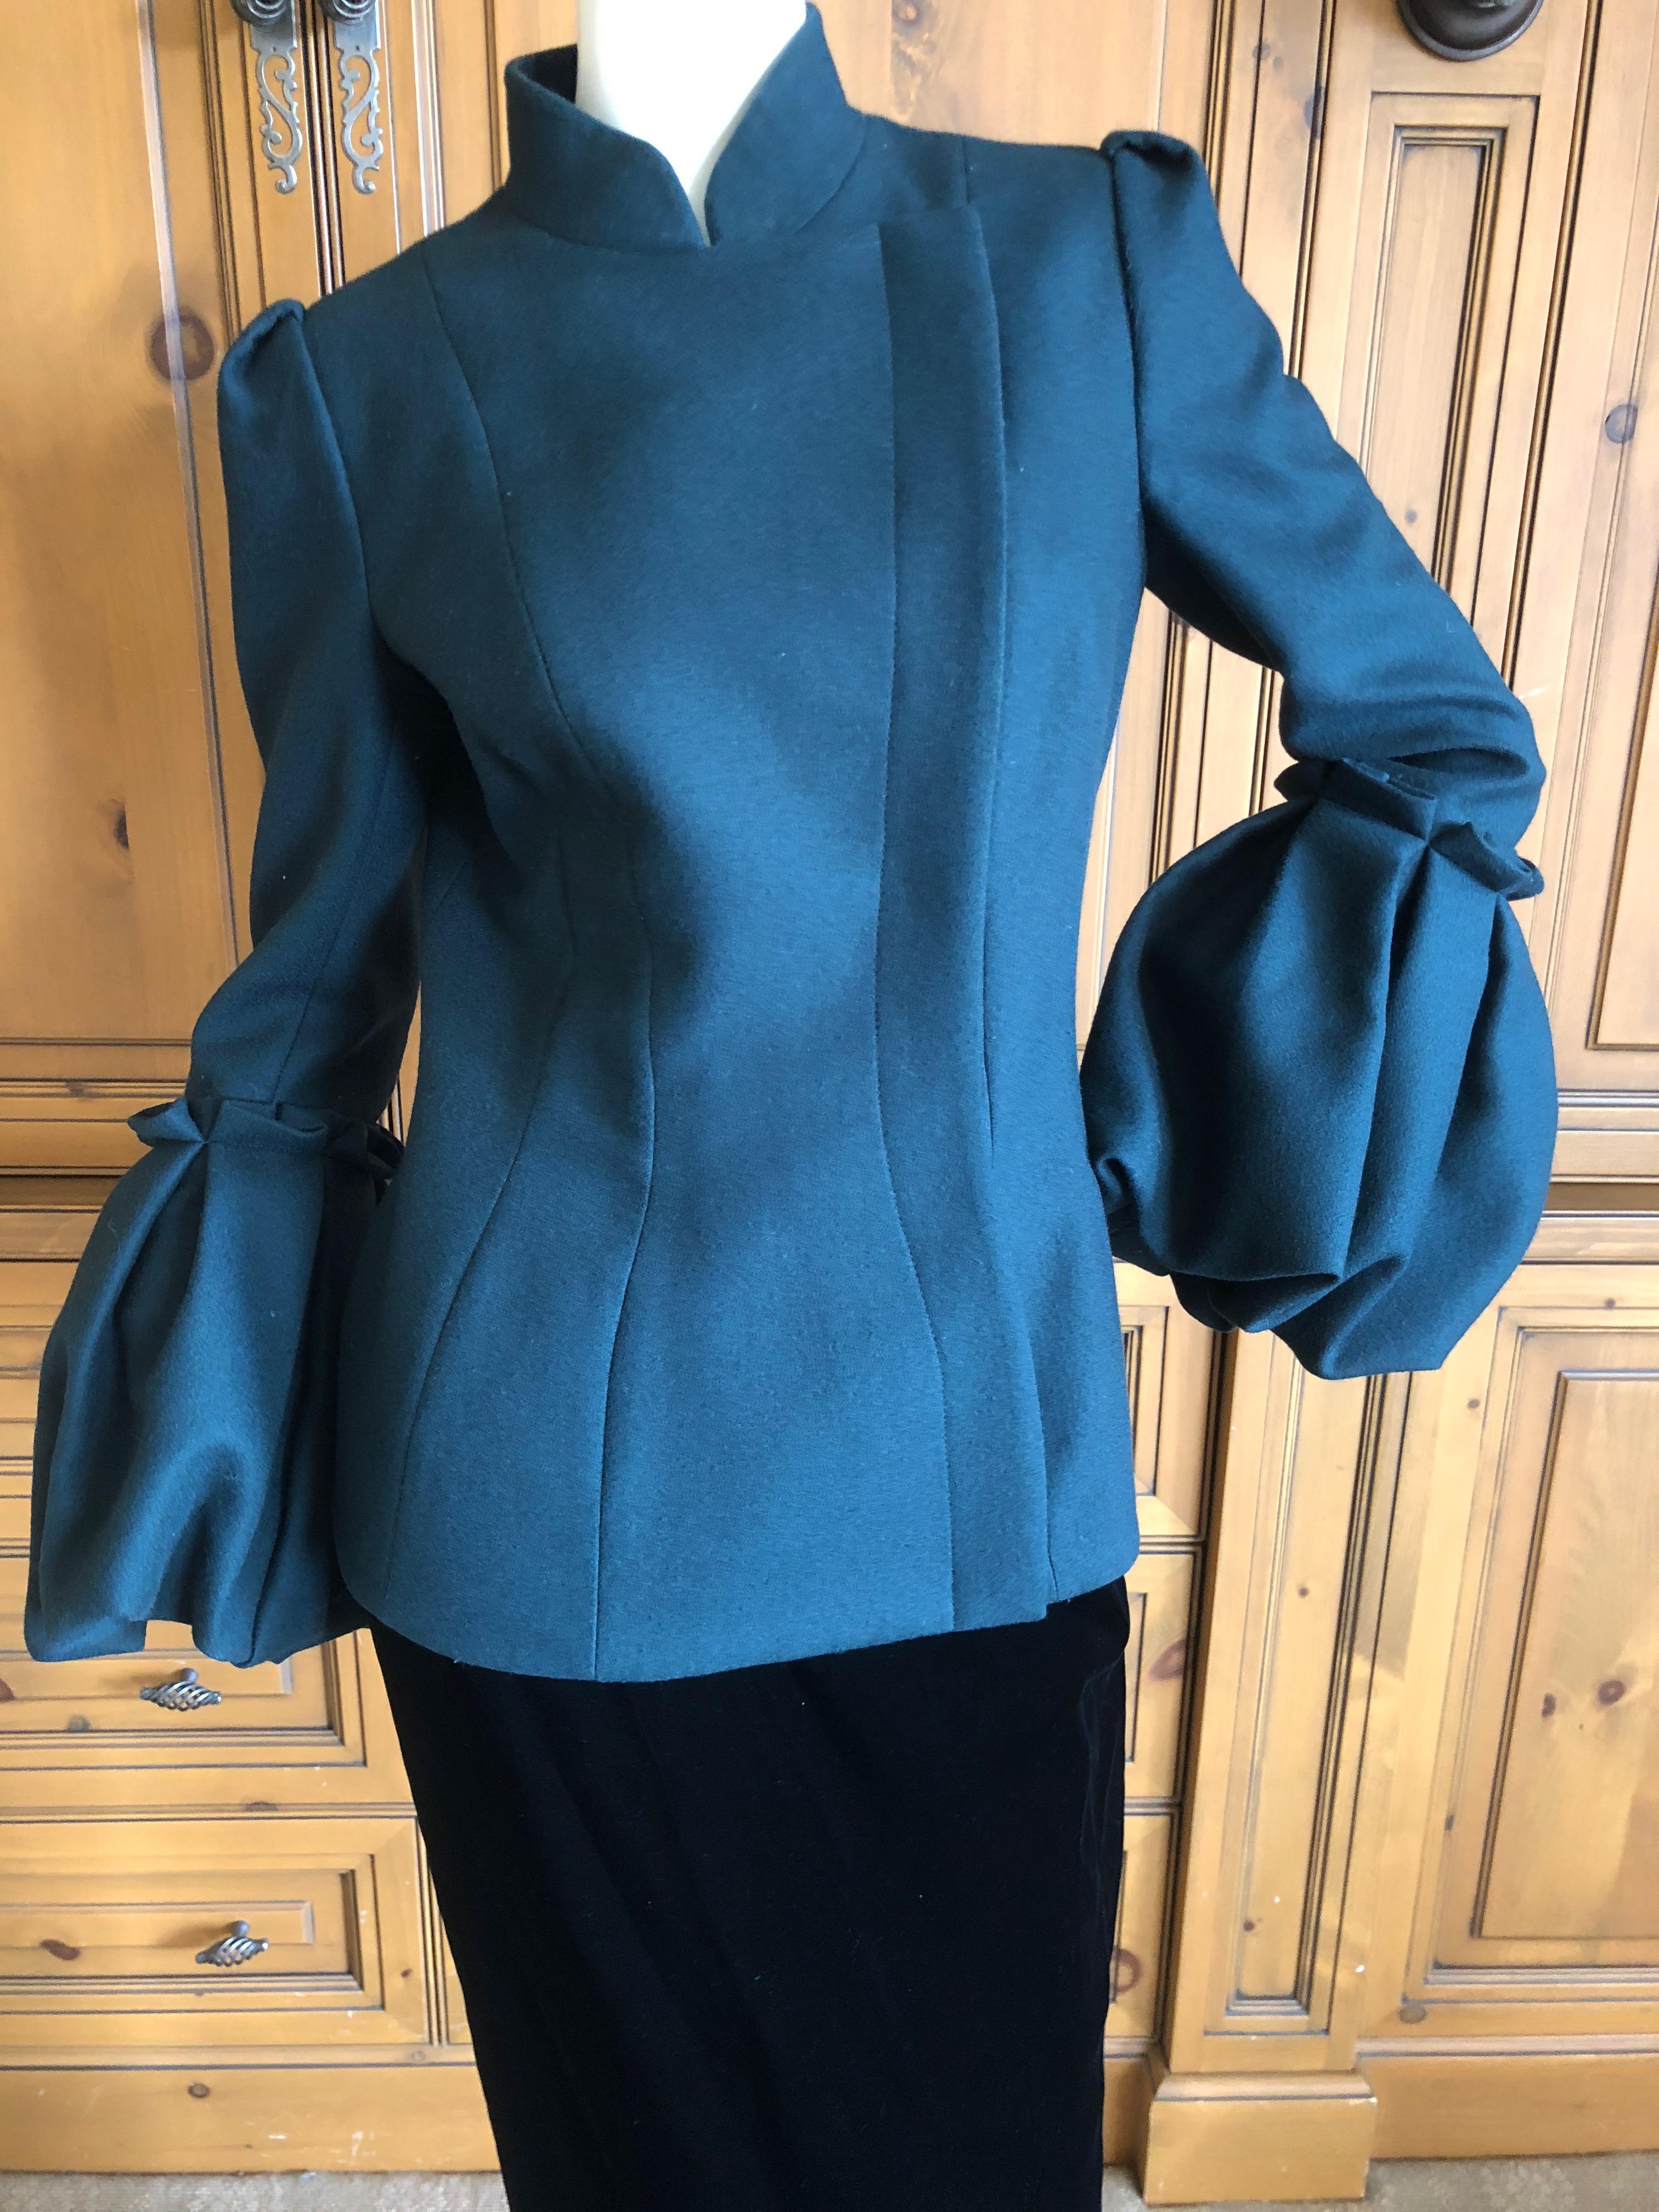 Women's Alexander McQueen Teal Green Wool Jacket with Exaggerated Cuffs Size 42 For Sale